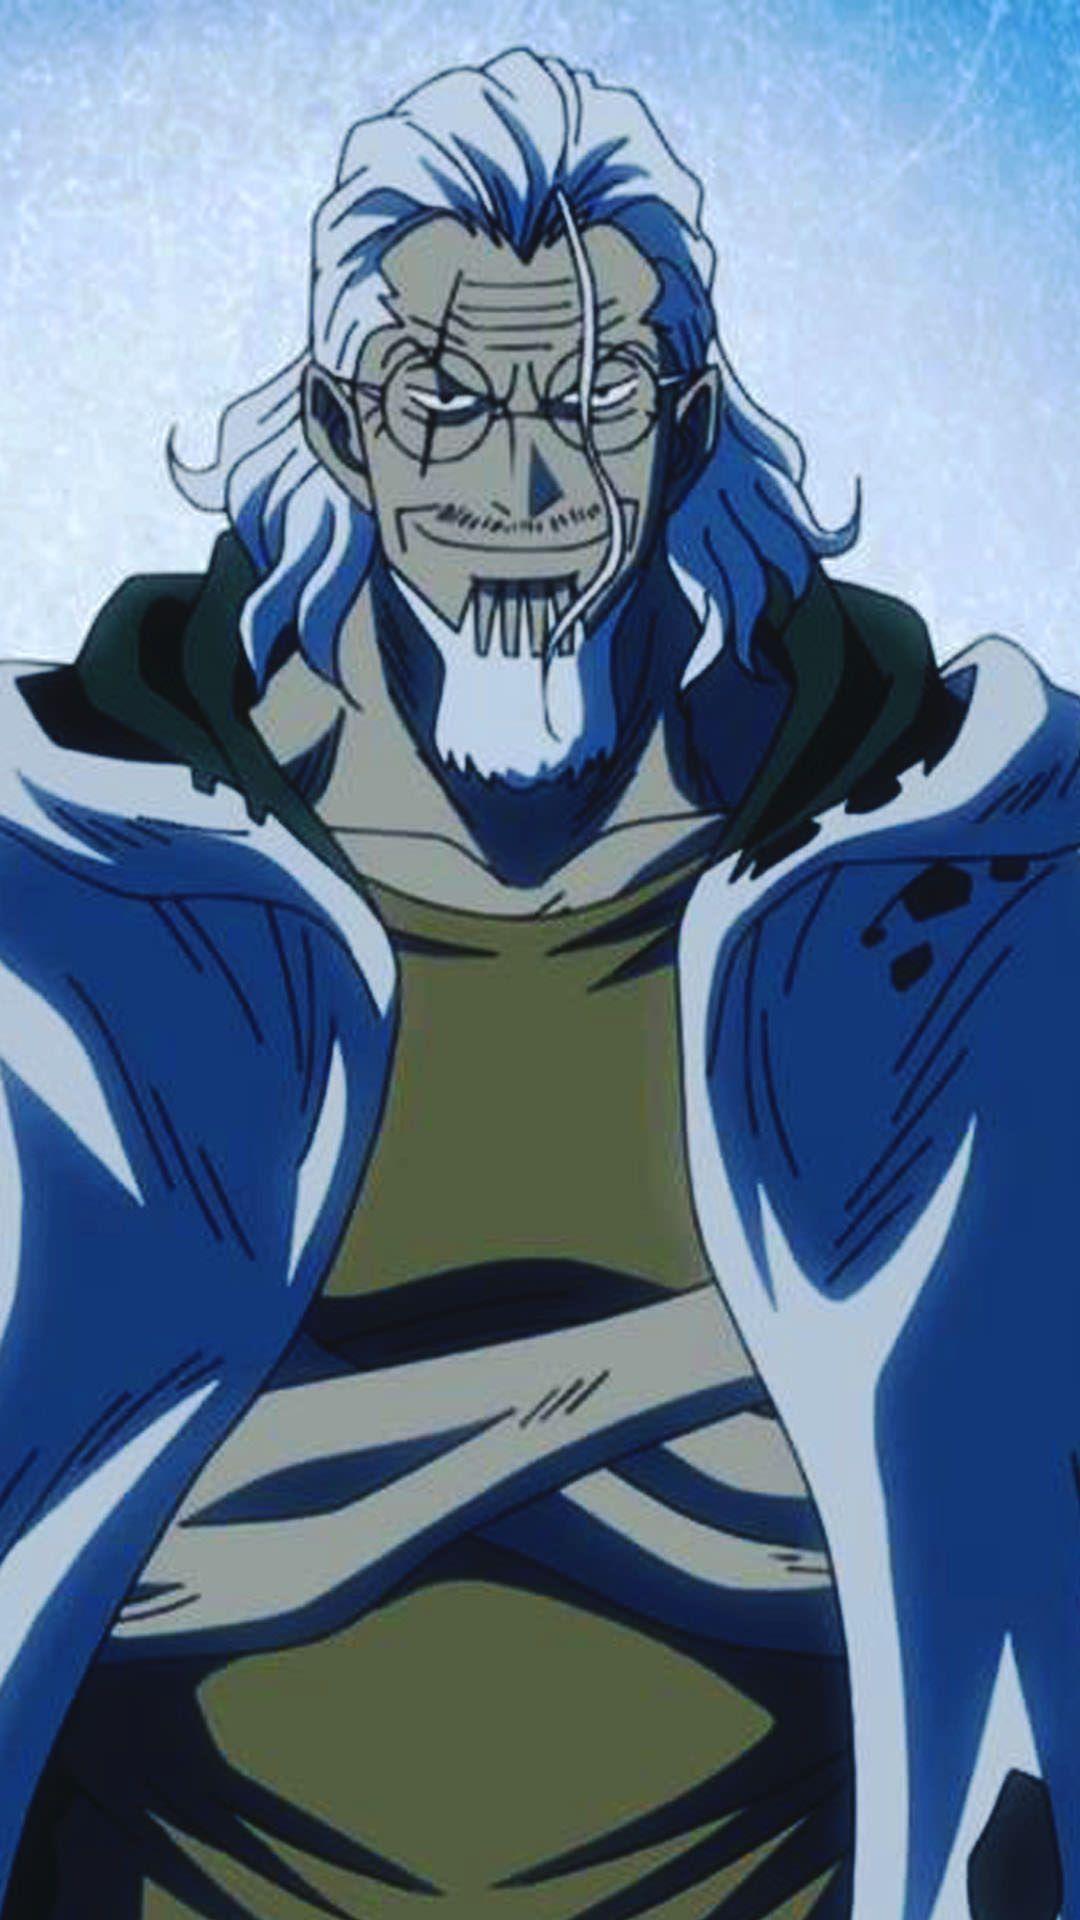 Silvers Rayleigh One Piece. Shakky's Rip Off Bar. One Piece, Anime